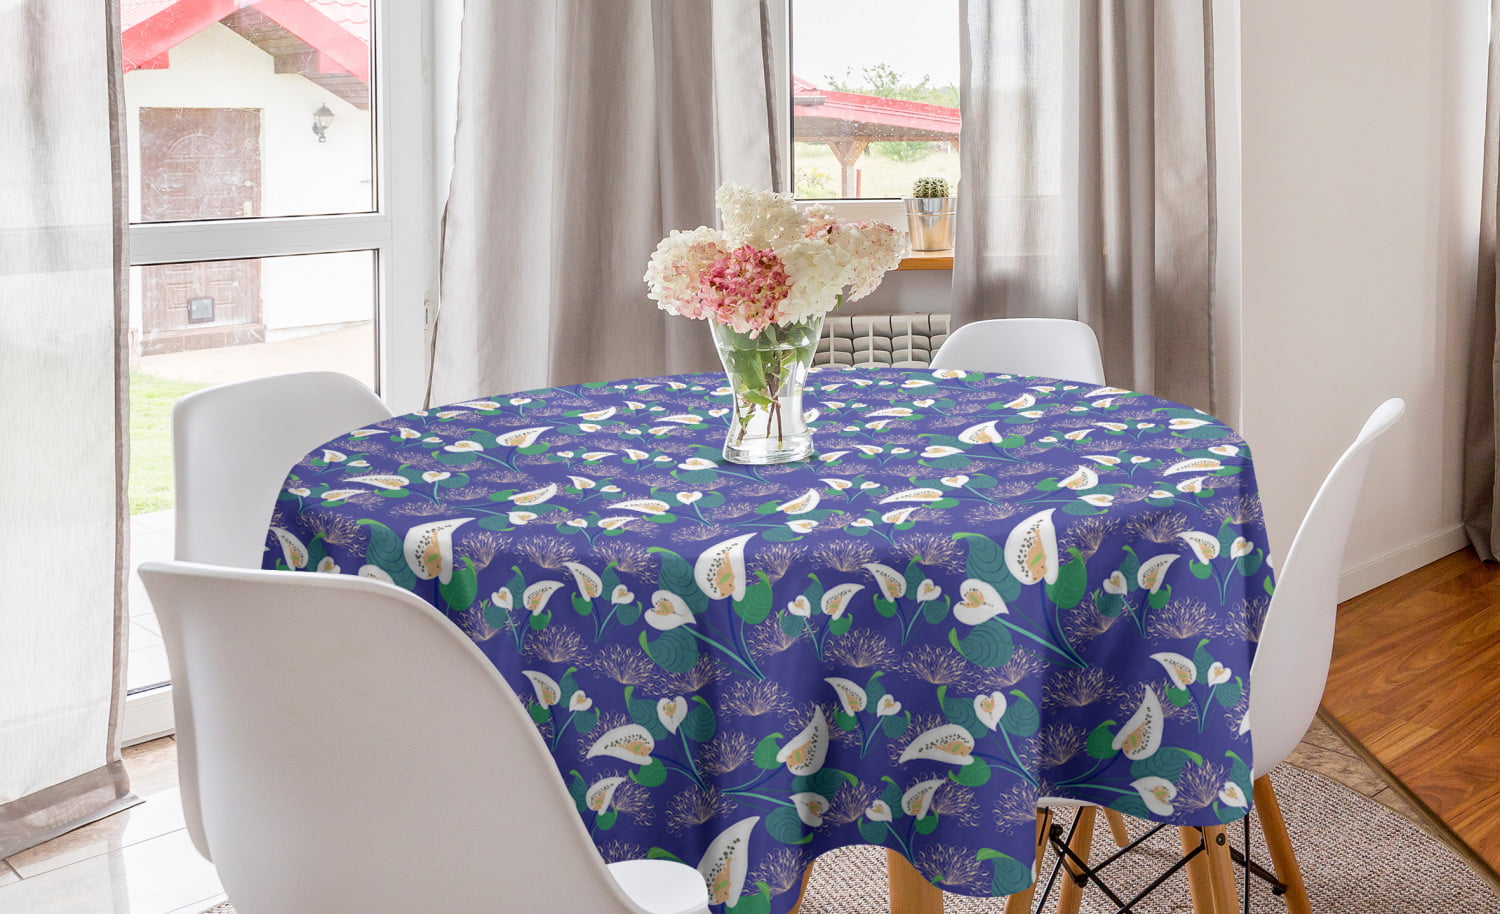 Giant Lily Flowering Petals Exotic Blooms Hawaiian Bouquet Beauty Dining Room Kitchen Rectangular Runner Ambesonne Floral Table Runner 16 X 72 Violet Marigold Apple Green